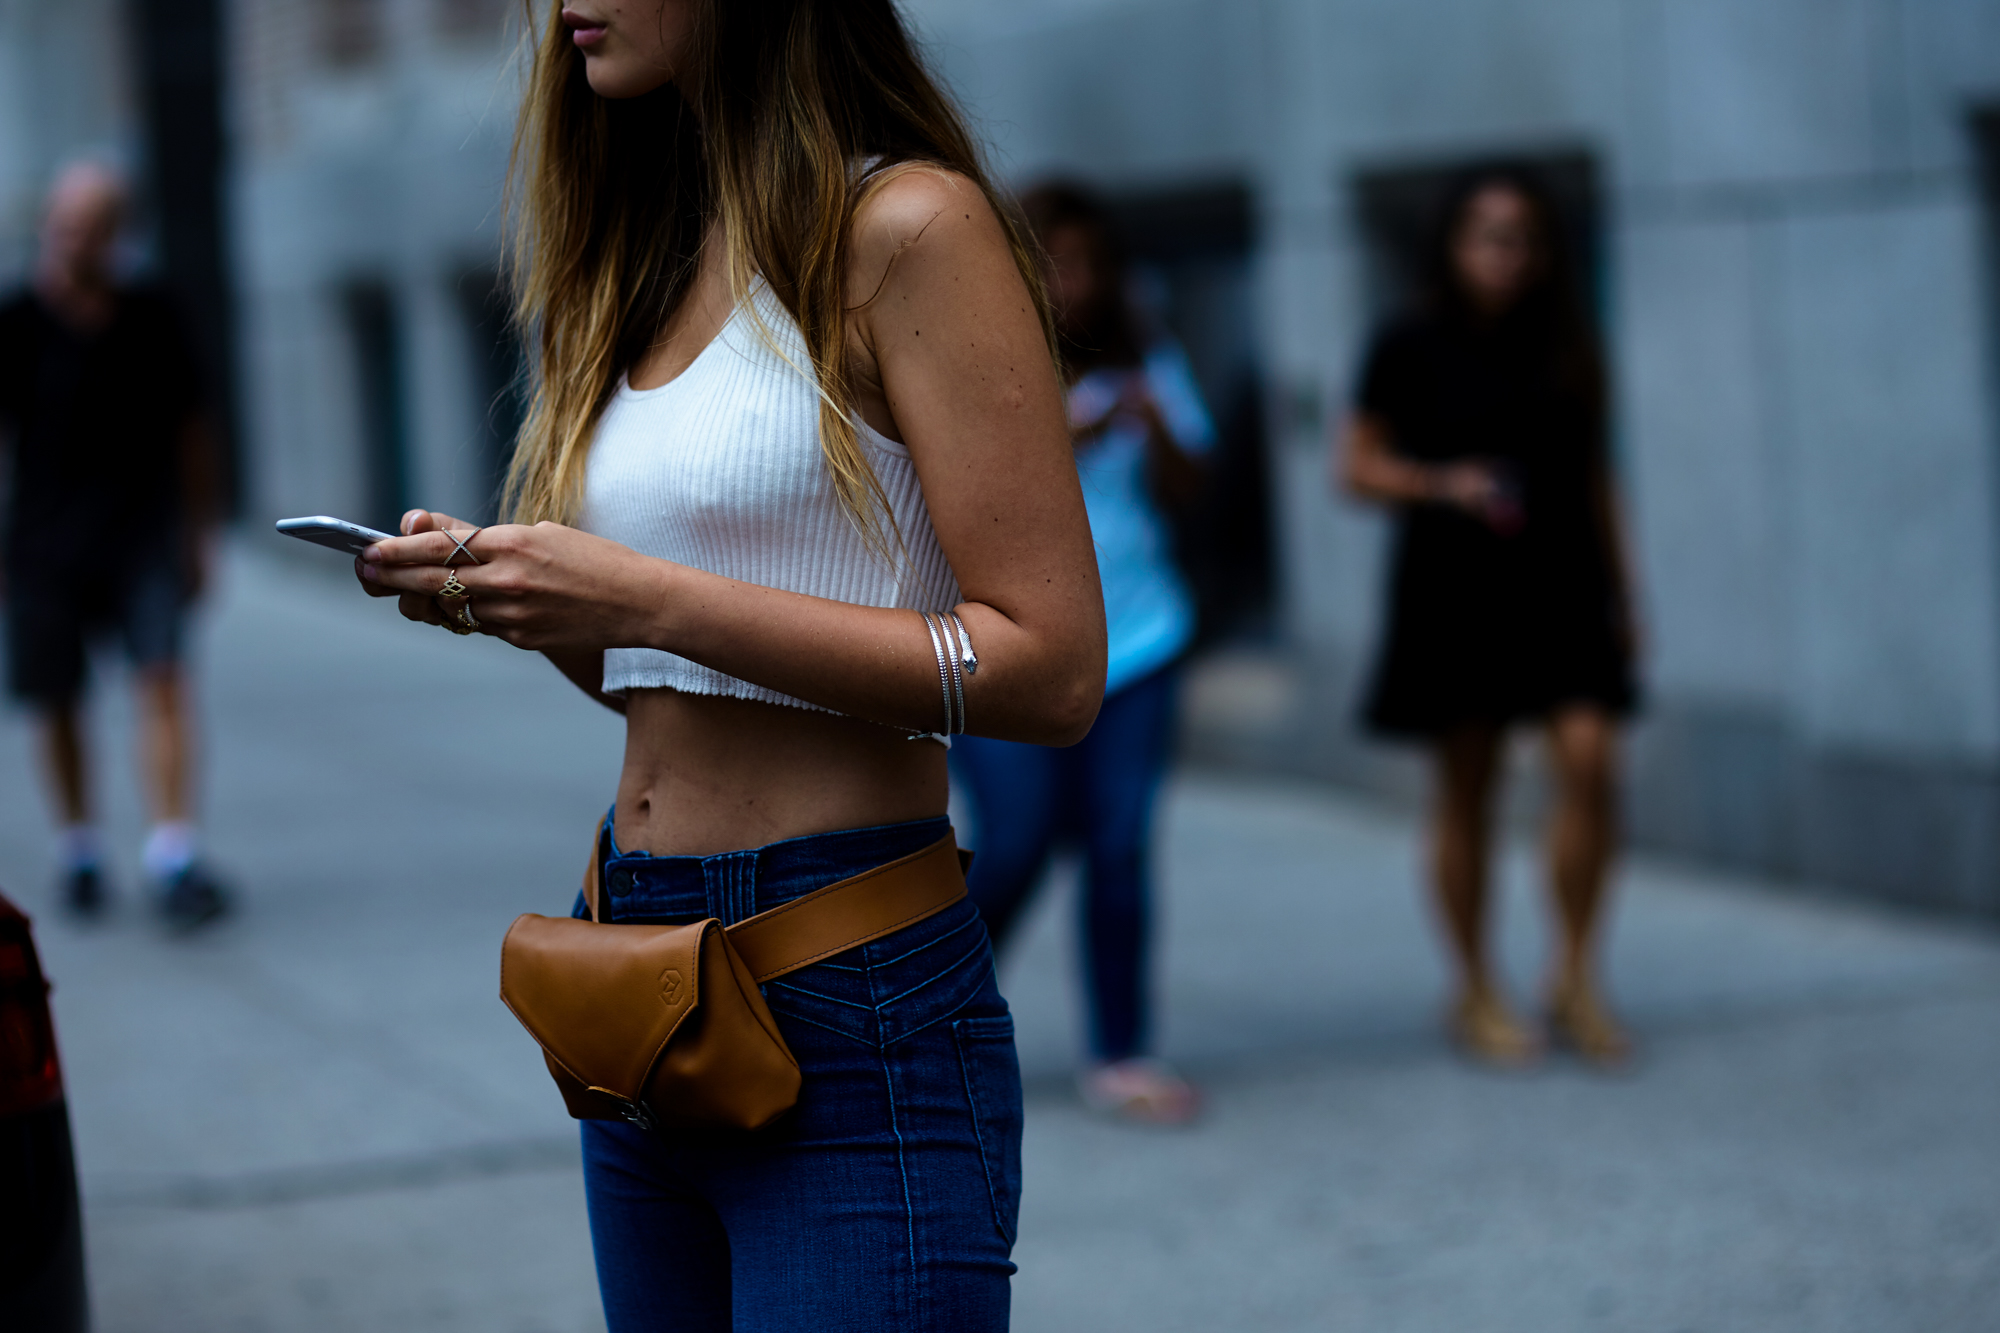 NYFW Spring-Summer 2017 Streetstyle: Doina Ciobanu wearing a belt bag and jeans before  a show in New York, September 2016